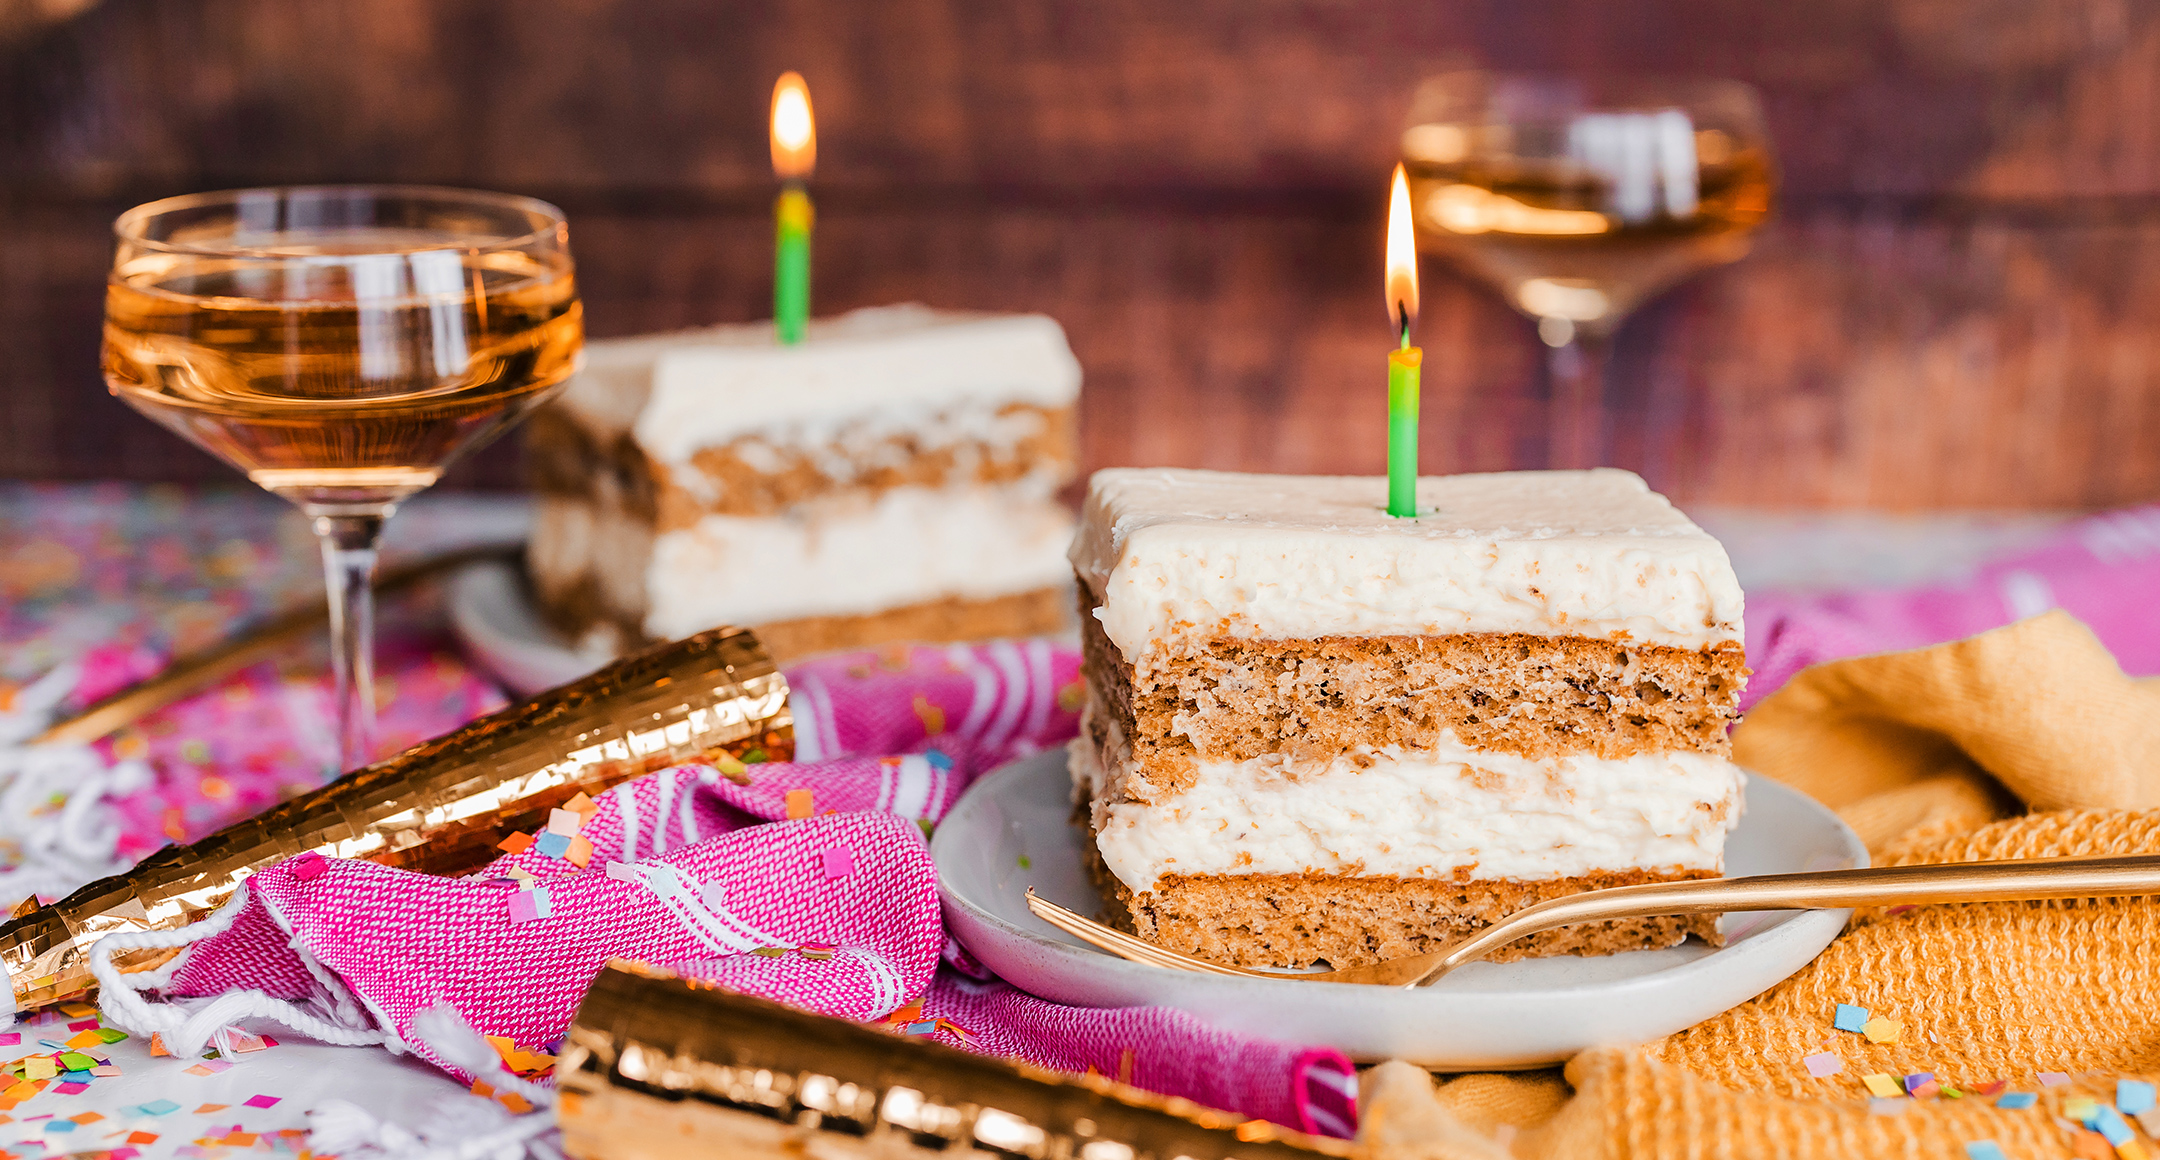 Two slices of birthday banana cake with lit candles sit atop a colorful tablecloth with a glass of wine. 